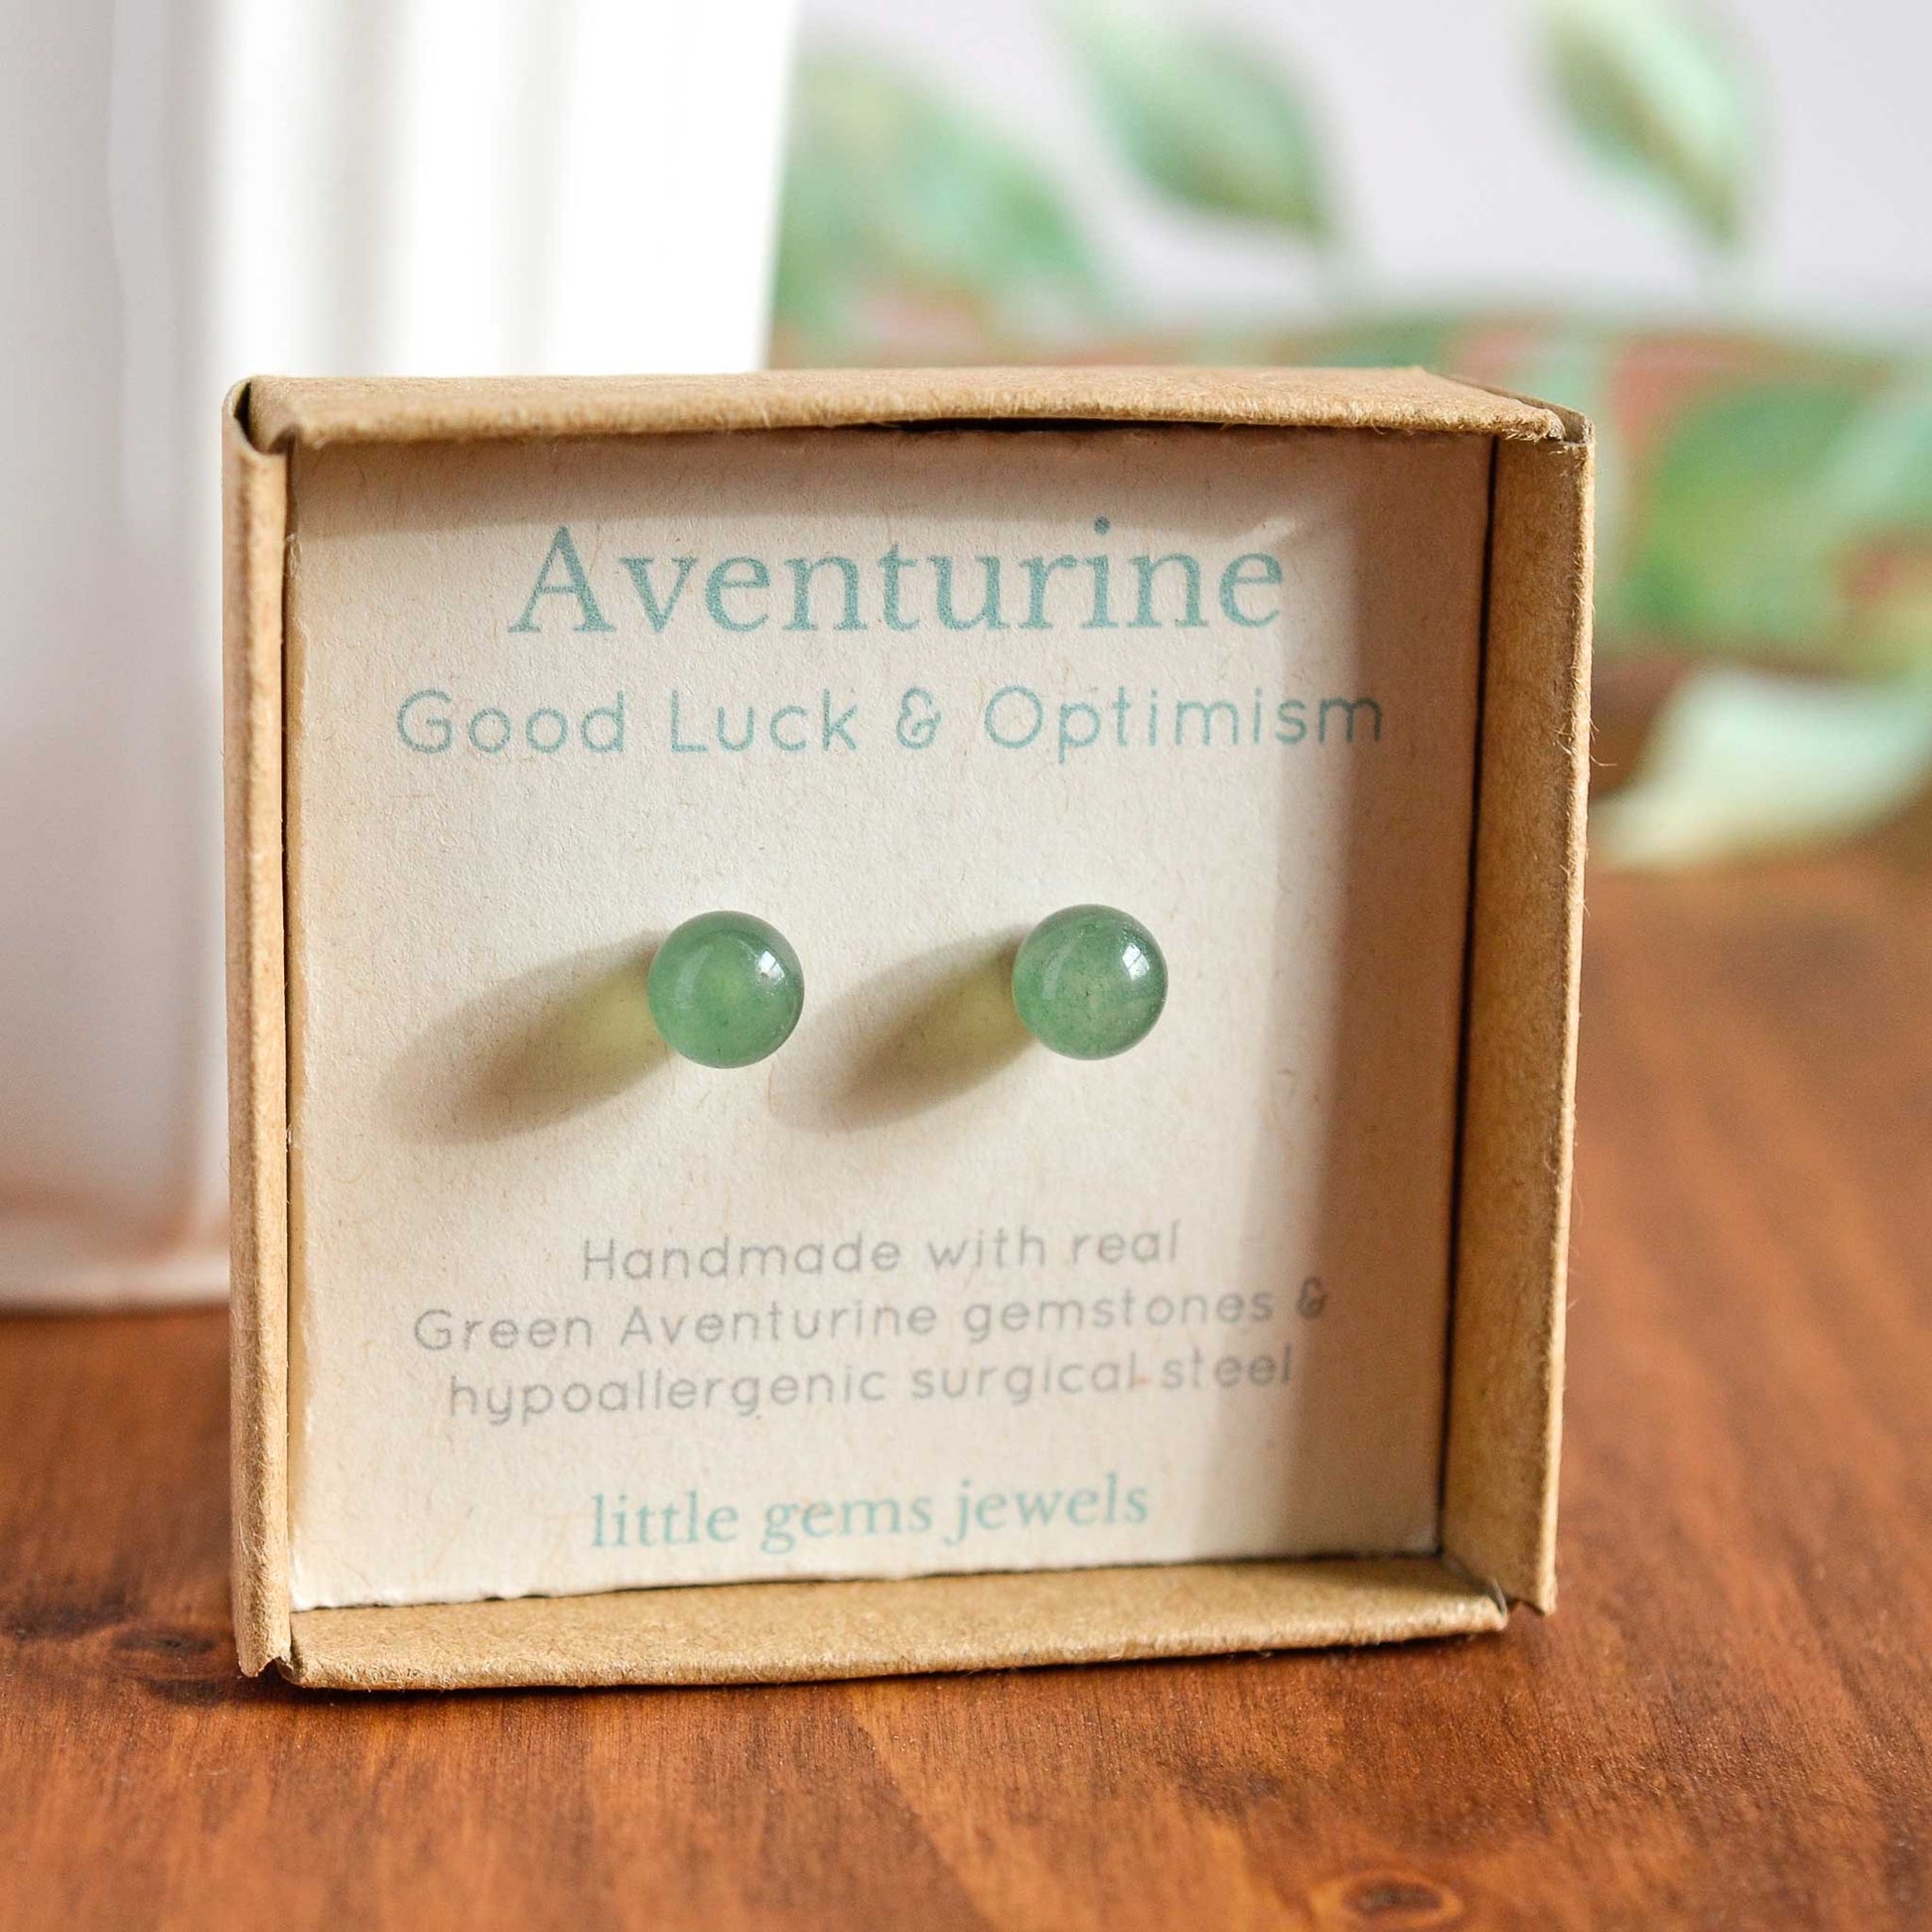 Green Aventurine for good luck and optimism gemstone stud earrings in eco friendly gift box